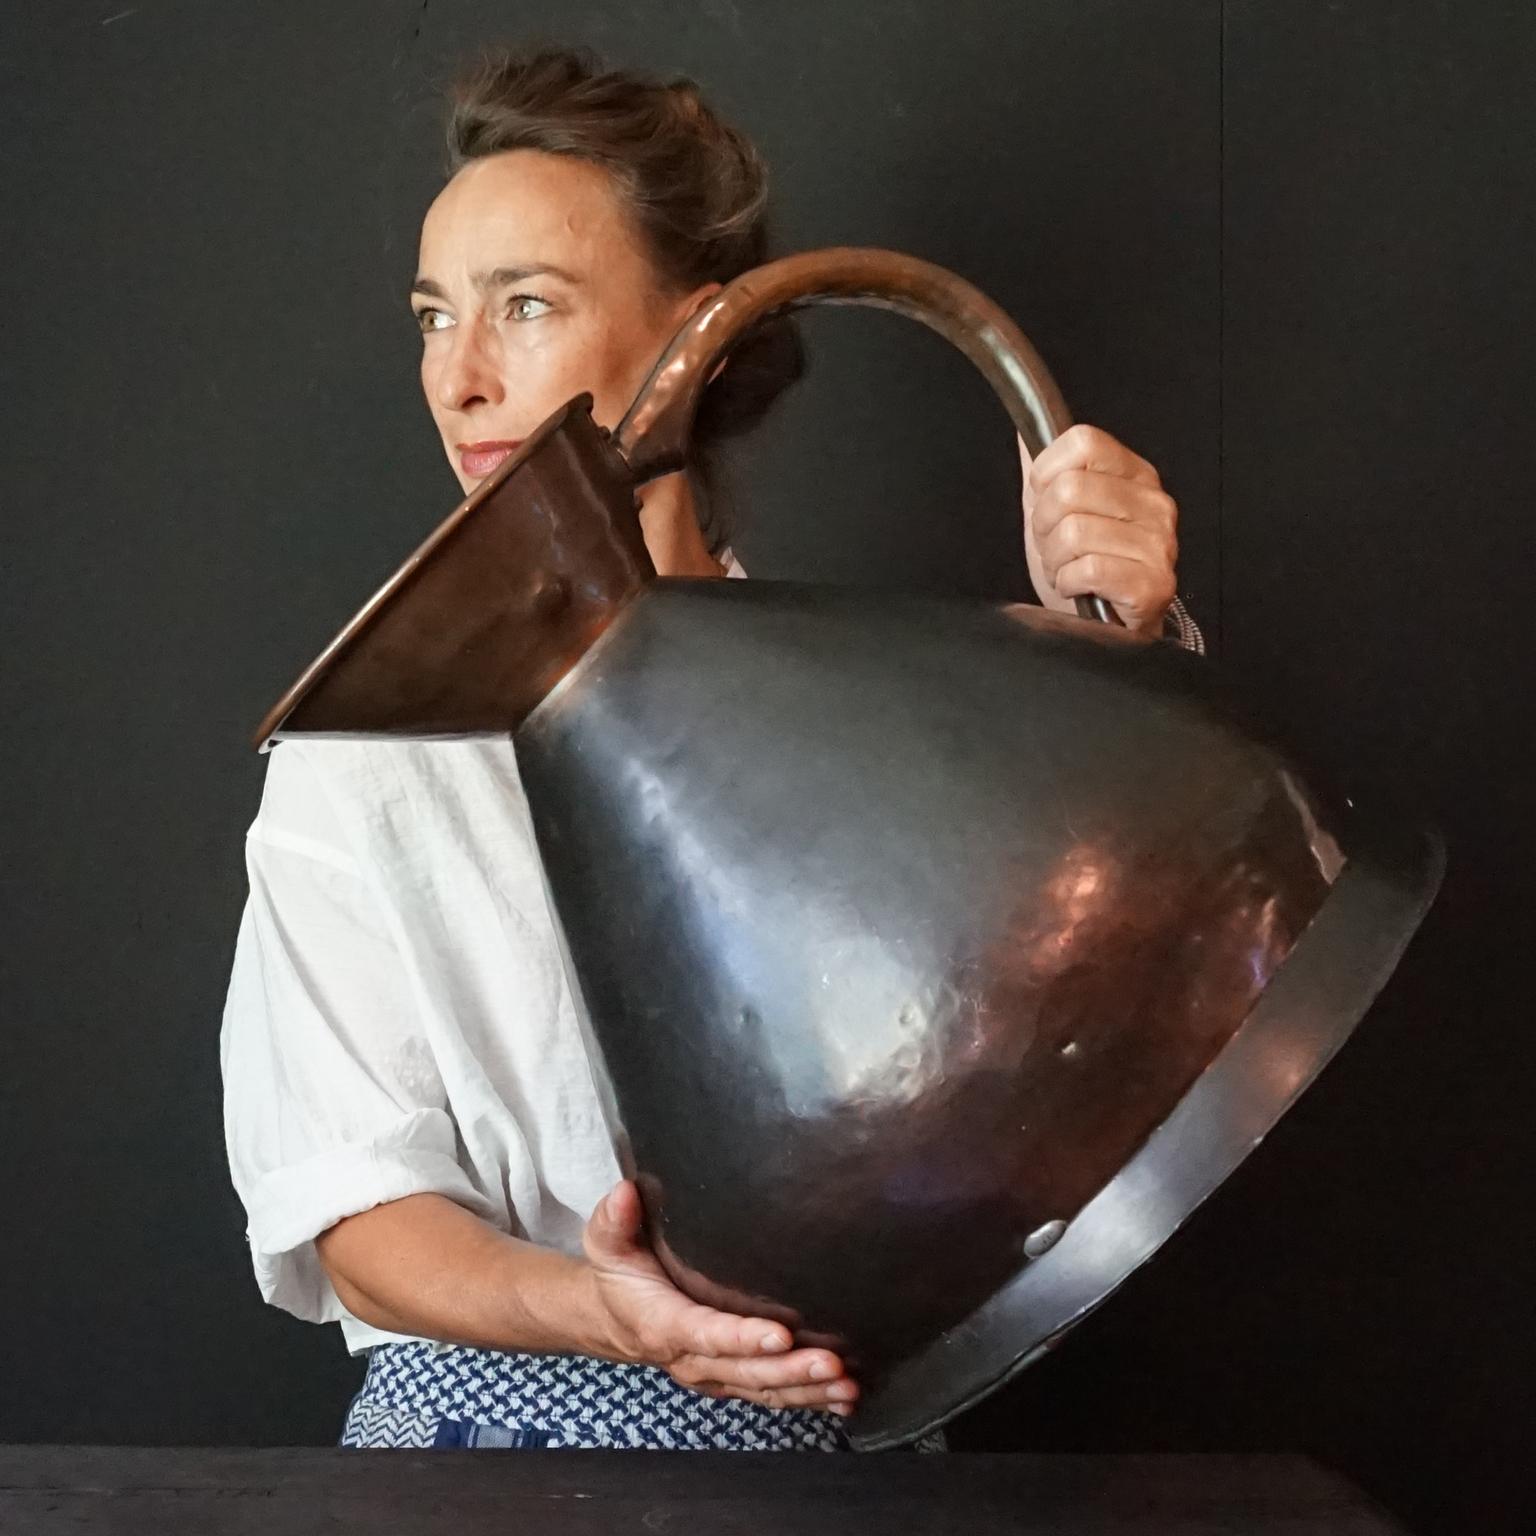 Enormous late 18th to early 19th century Georgian copper 5 gallon haystack jug or pitcher, massive tapered body with a large handle. Copper haystack measures, named for their haystack pitcher shape were first used in England in the 18th century to